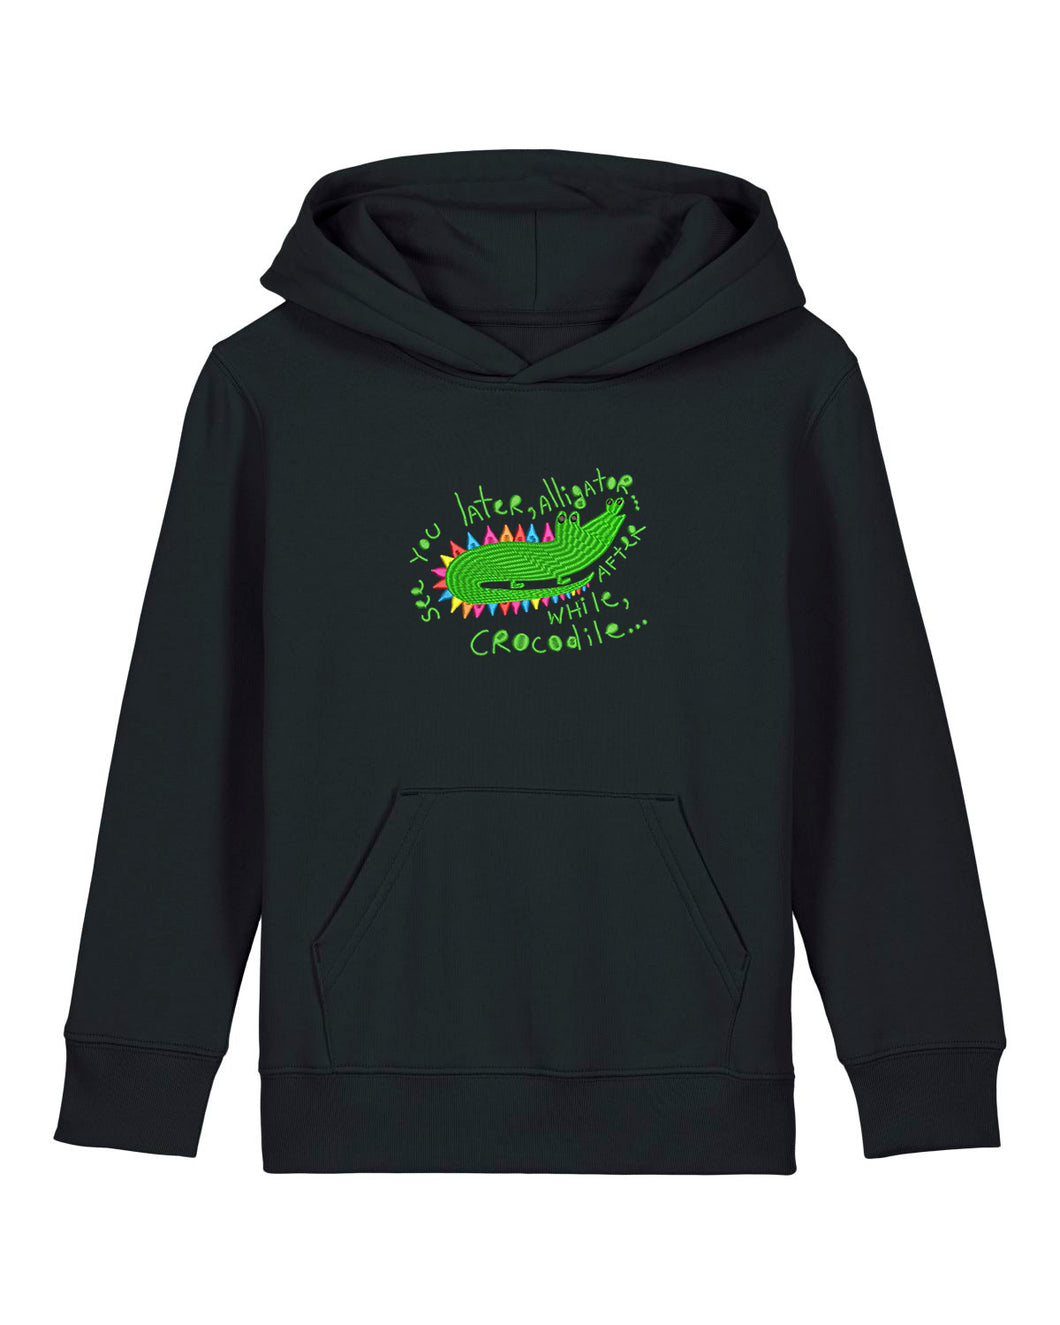 See you later, alligator...🐊 - Embroidered UNISEX KIDS hoodie